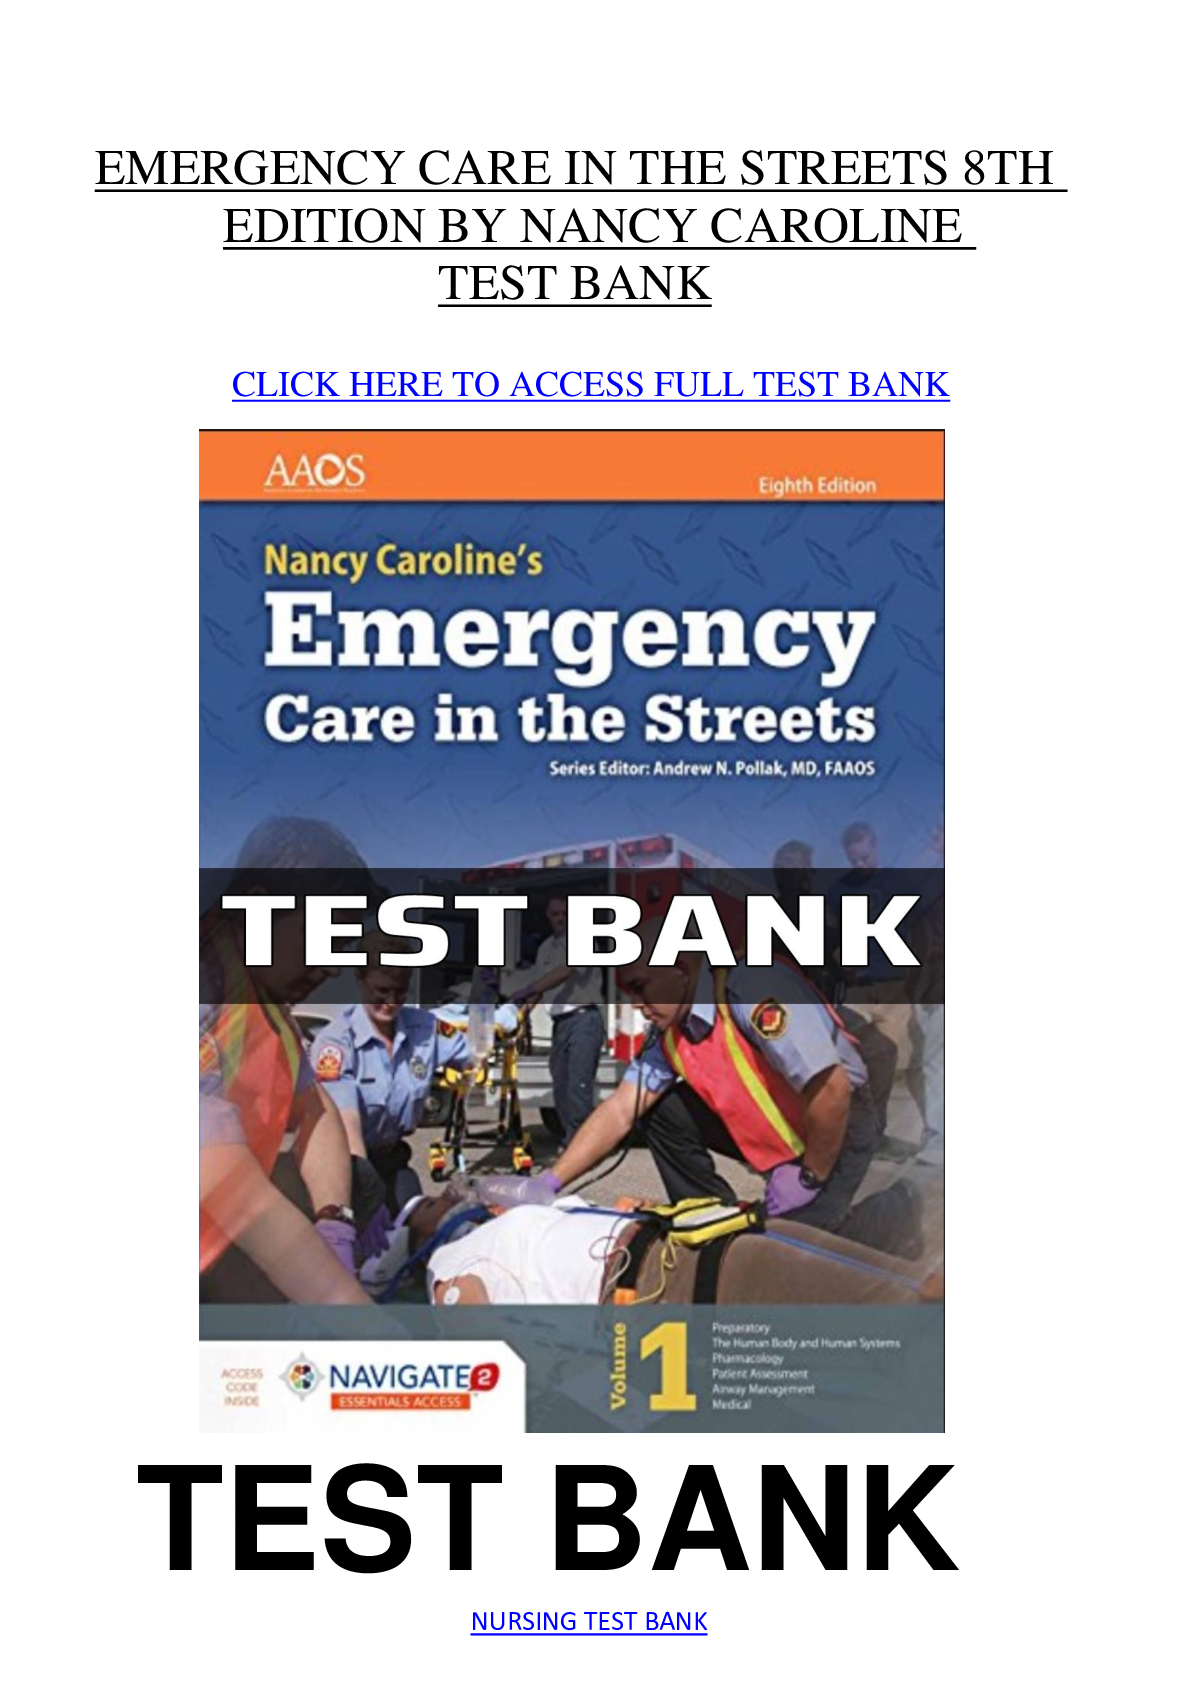 EMERGENCY CARE IN THE STREETS 8TH EDITION   TEST BANK